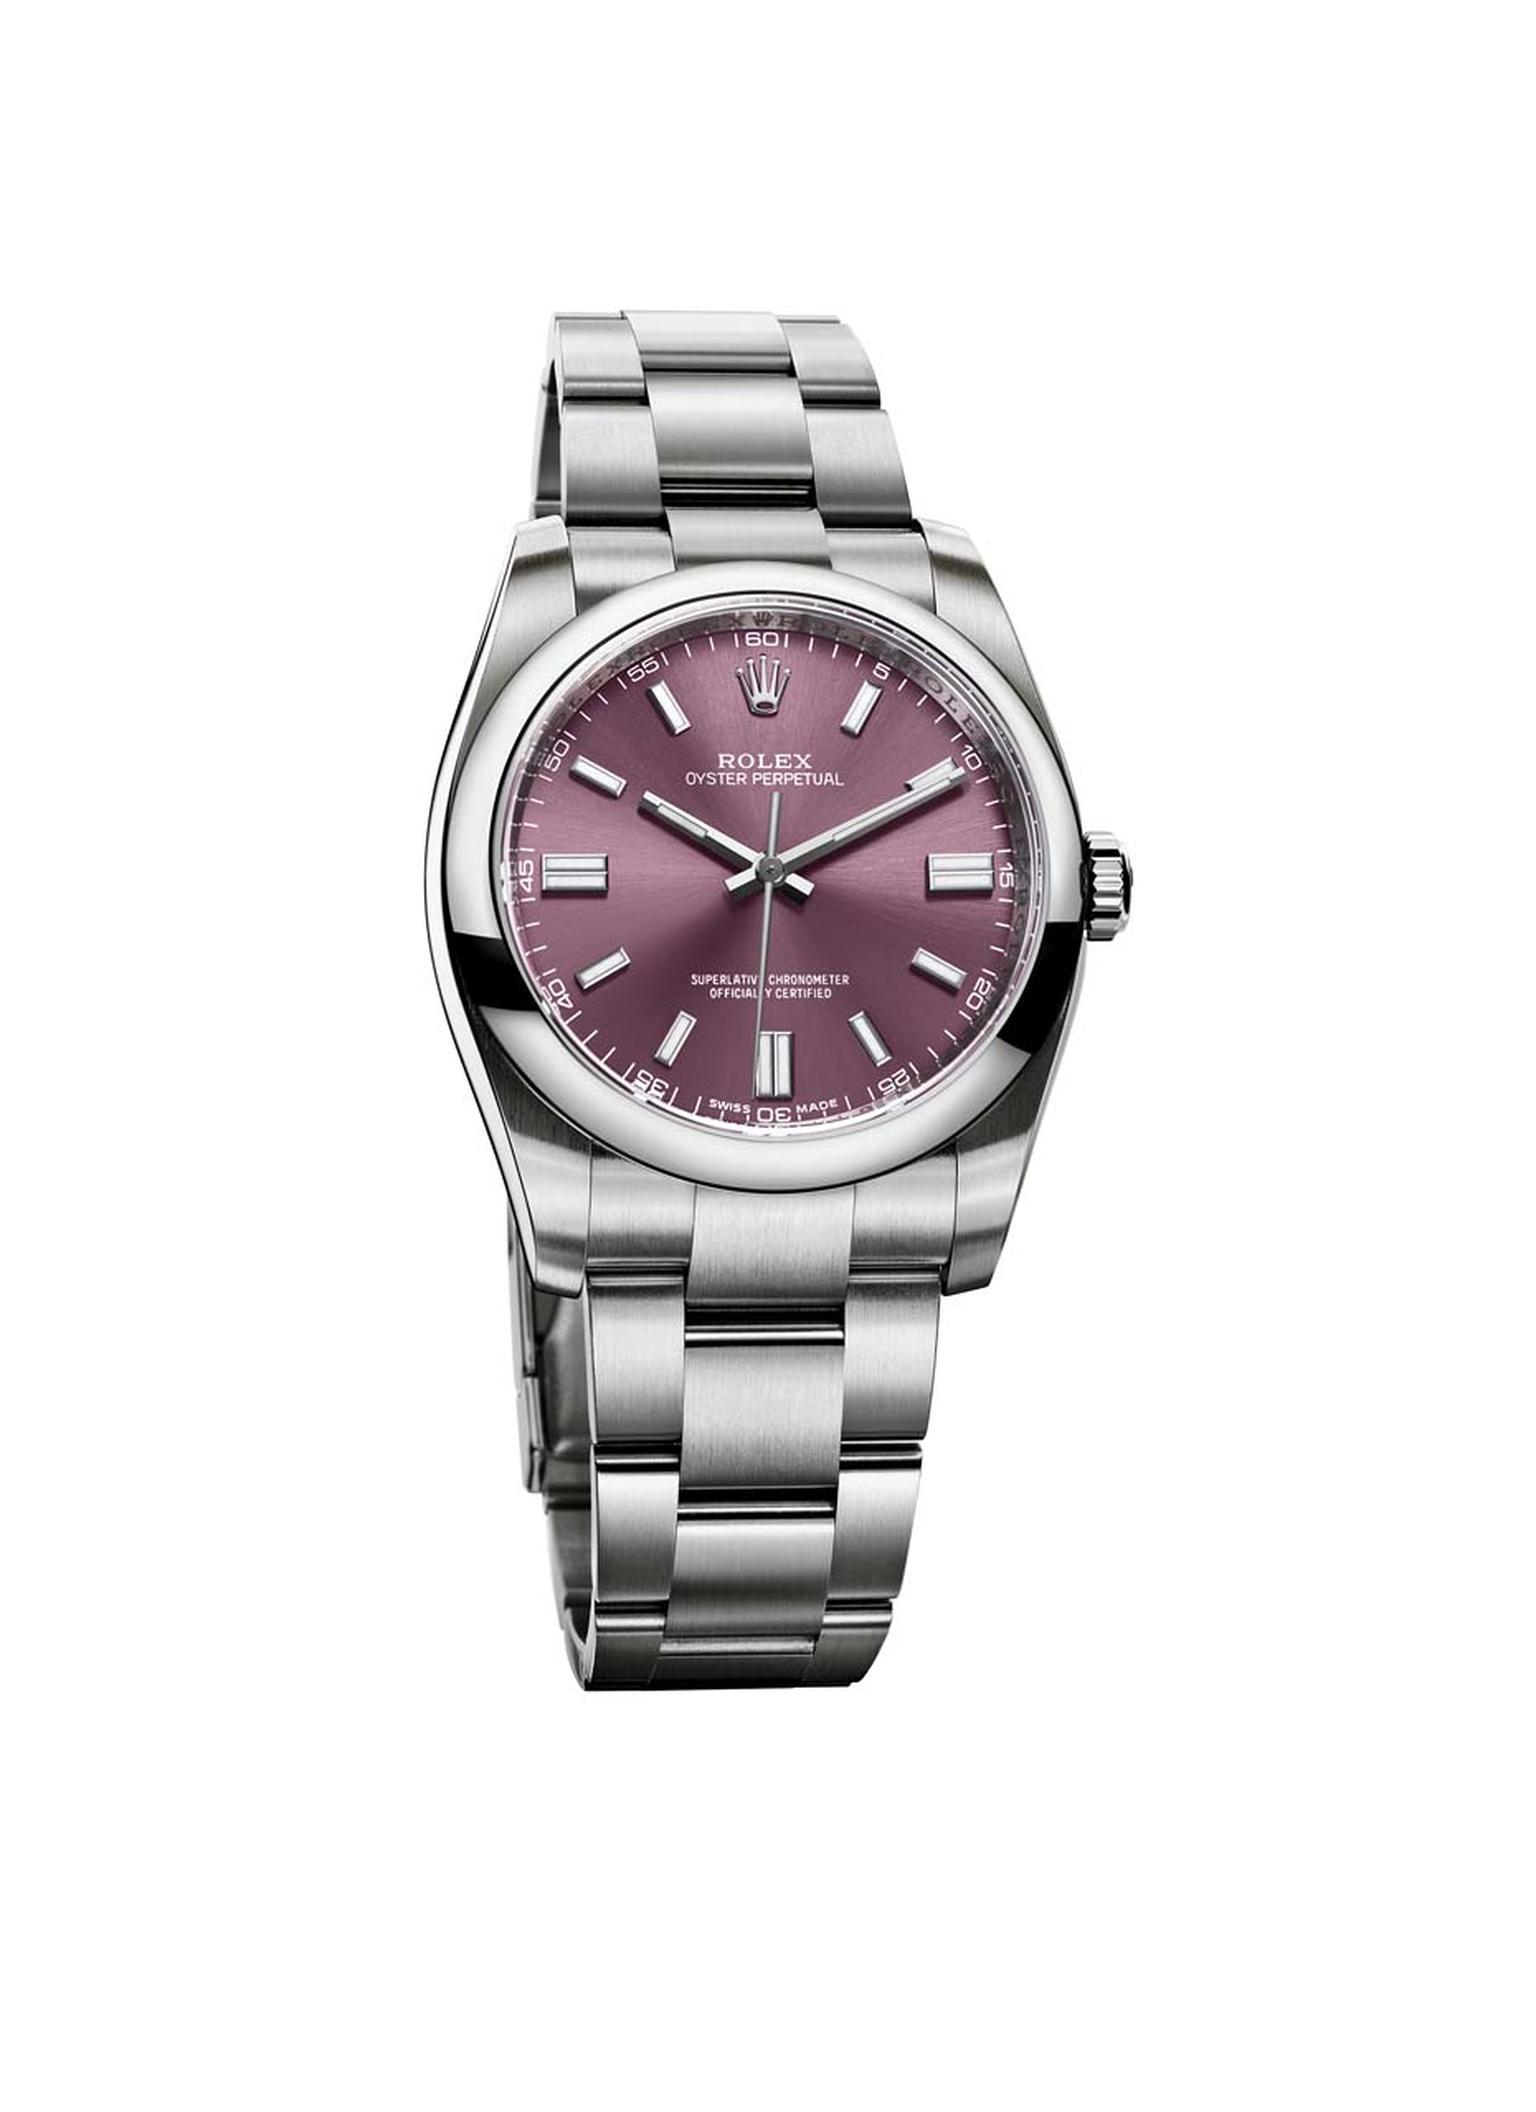 The Rolex Oyster Perpetual watch is the purest expression of the Oyster. The Perpetual model offers a clear, accurate time display against the red grape dial.